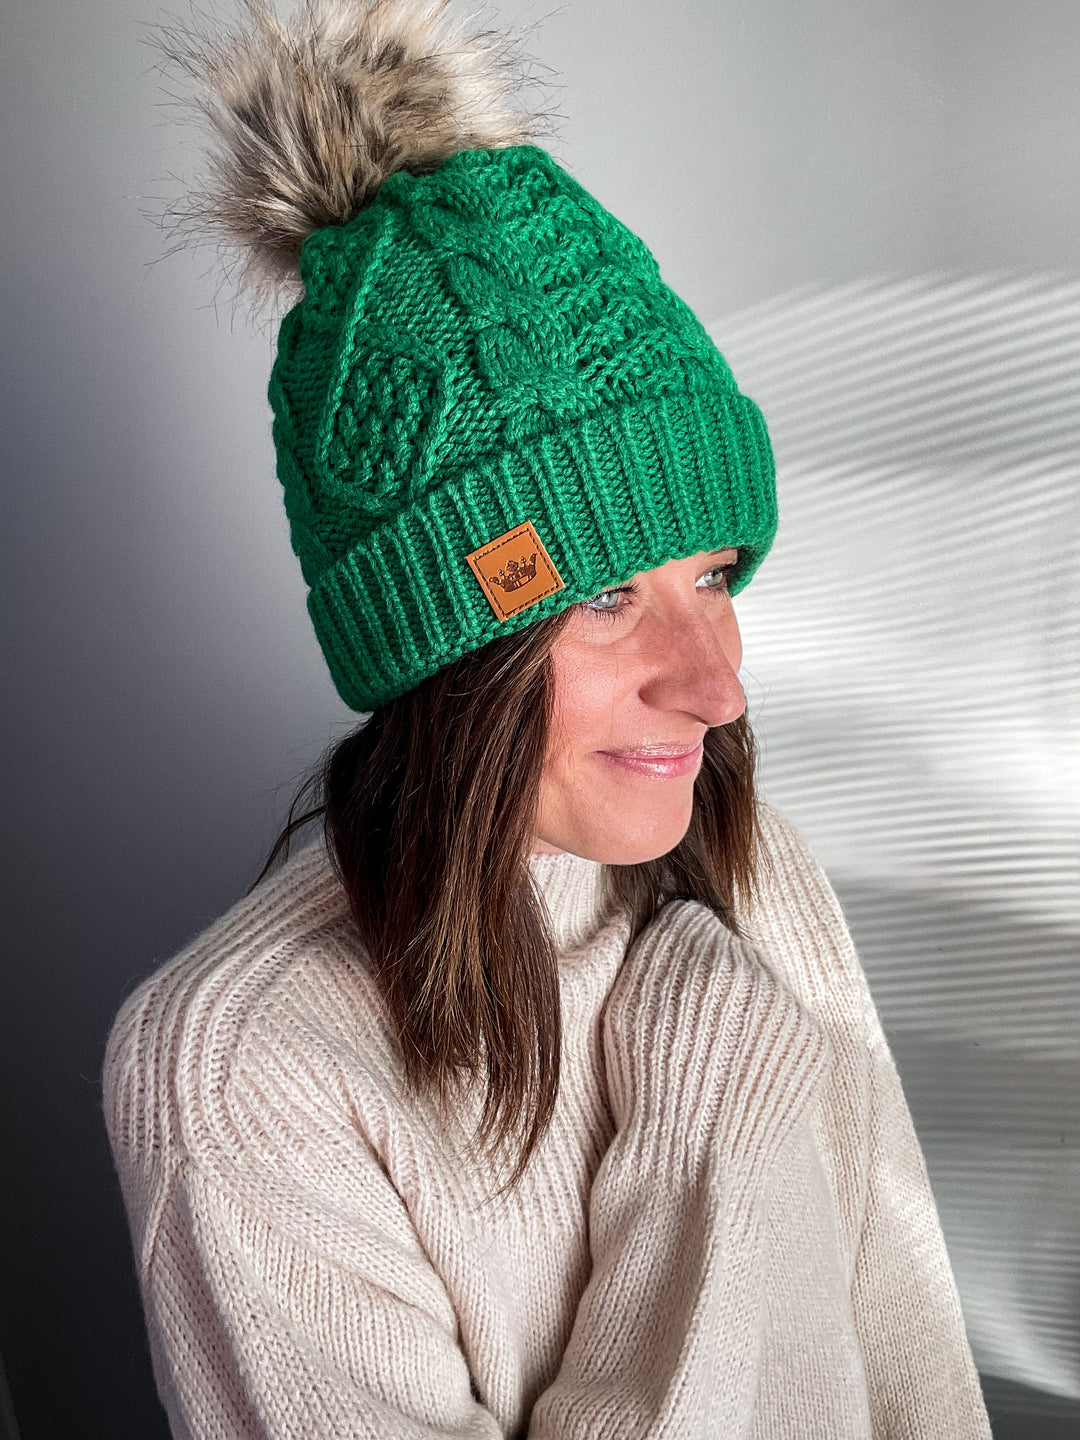 Cute Warm Winter Hats - Kelly Green Cable Knit Pom Hat